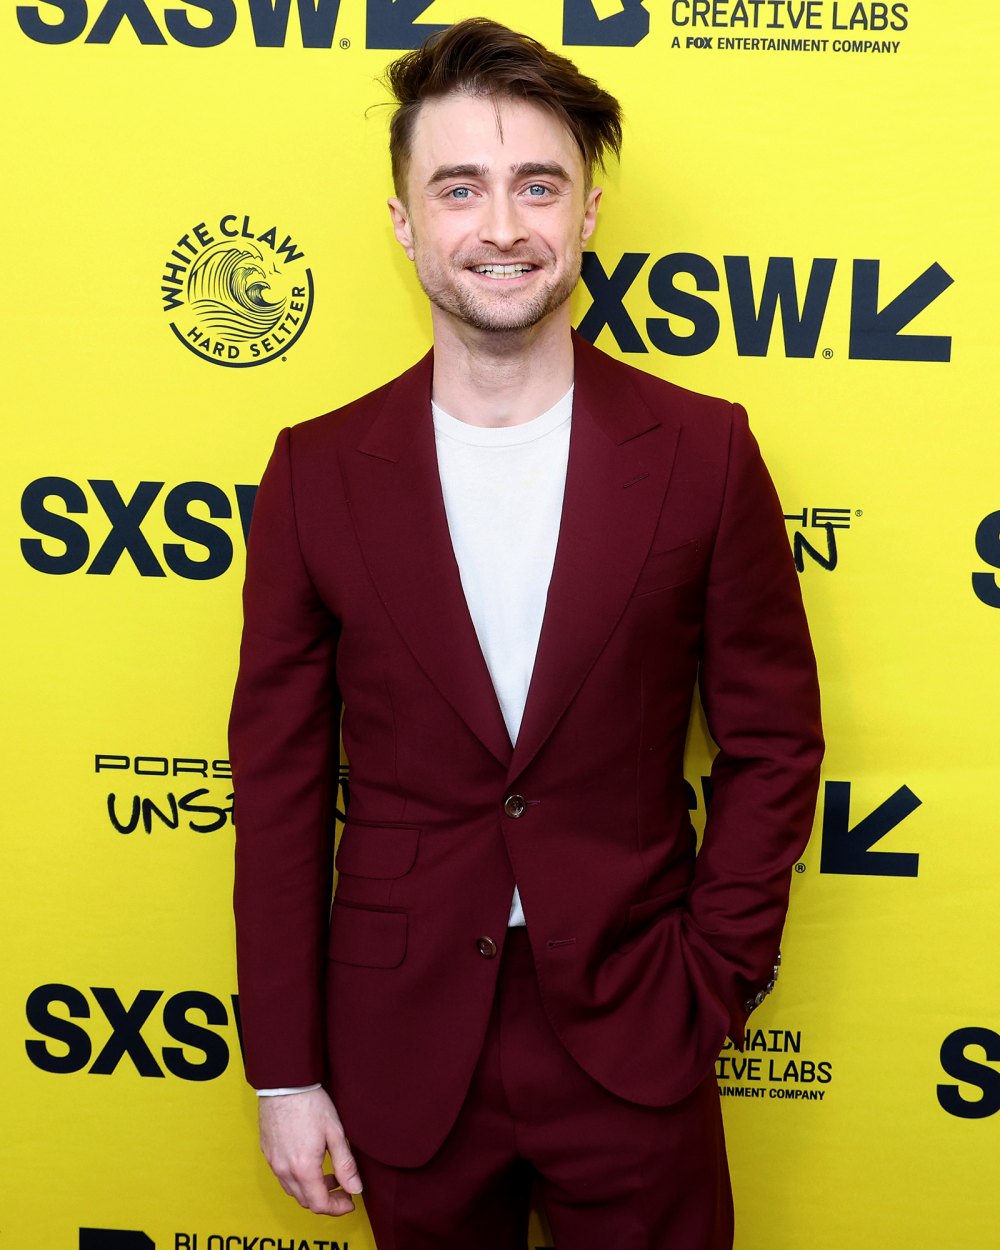 Daniel Radcliffe Has Read FanfictIon Stories About Harry Potter Having a Relationship With Draco